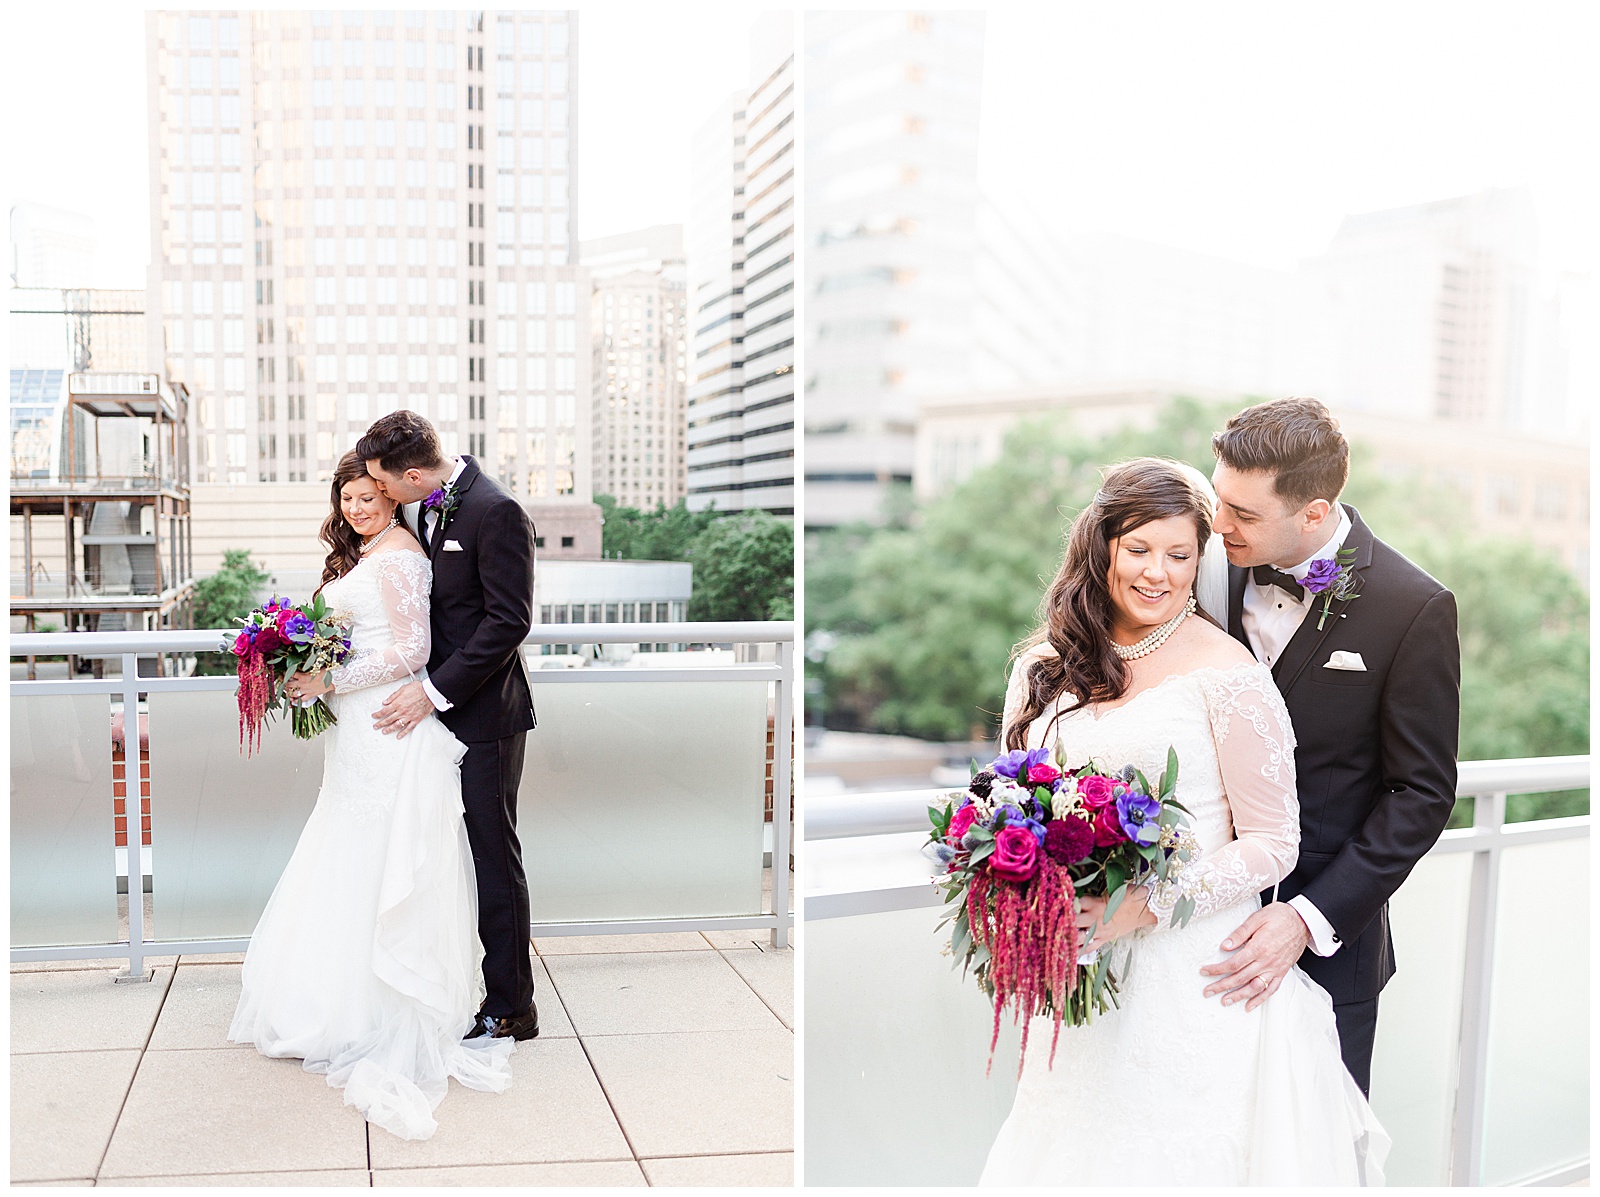 💍 bride groom portraits with downtown city in the background venue 👰 Bride: lace wedding dress with rhinestone belt rhinestone barrette in hair down with pearls 🤵 Groom: black tux tuxedo and purple flower boutonnière 💍 Bright Colorful Summer City Wedding in Charlotte, NC with Taryn and Ryan | Kevyn Dixon Photography